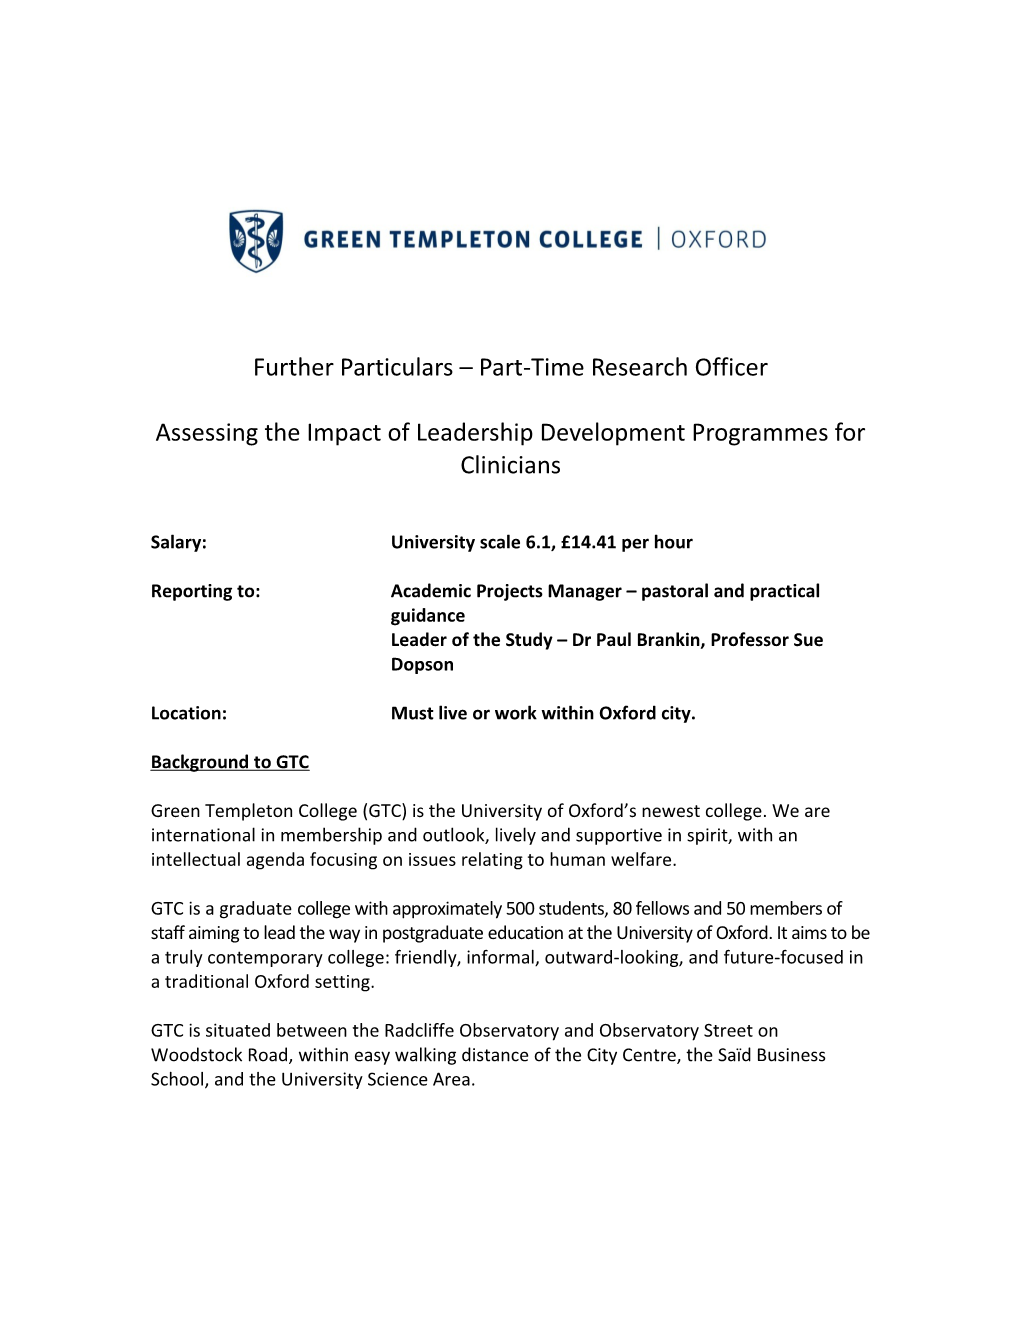 Further Particulars Part-Time Research Officer